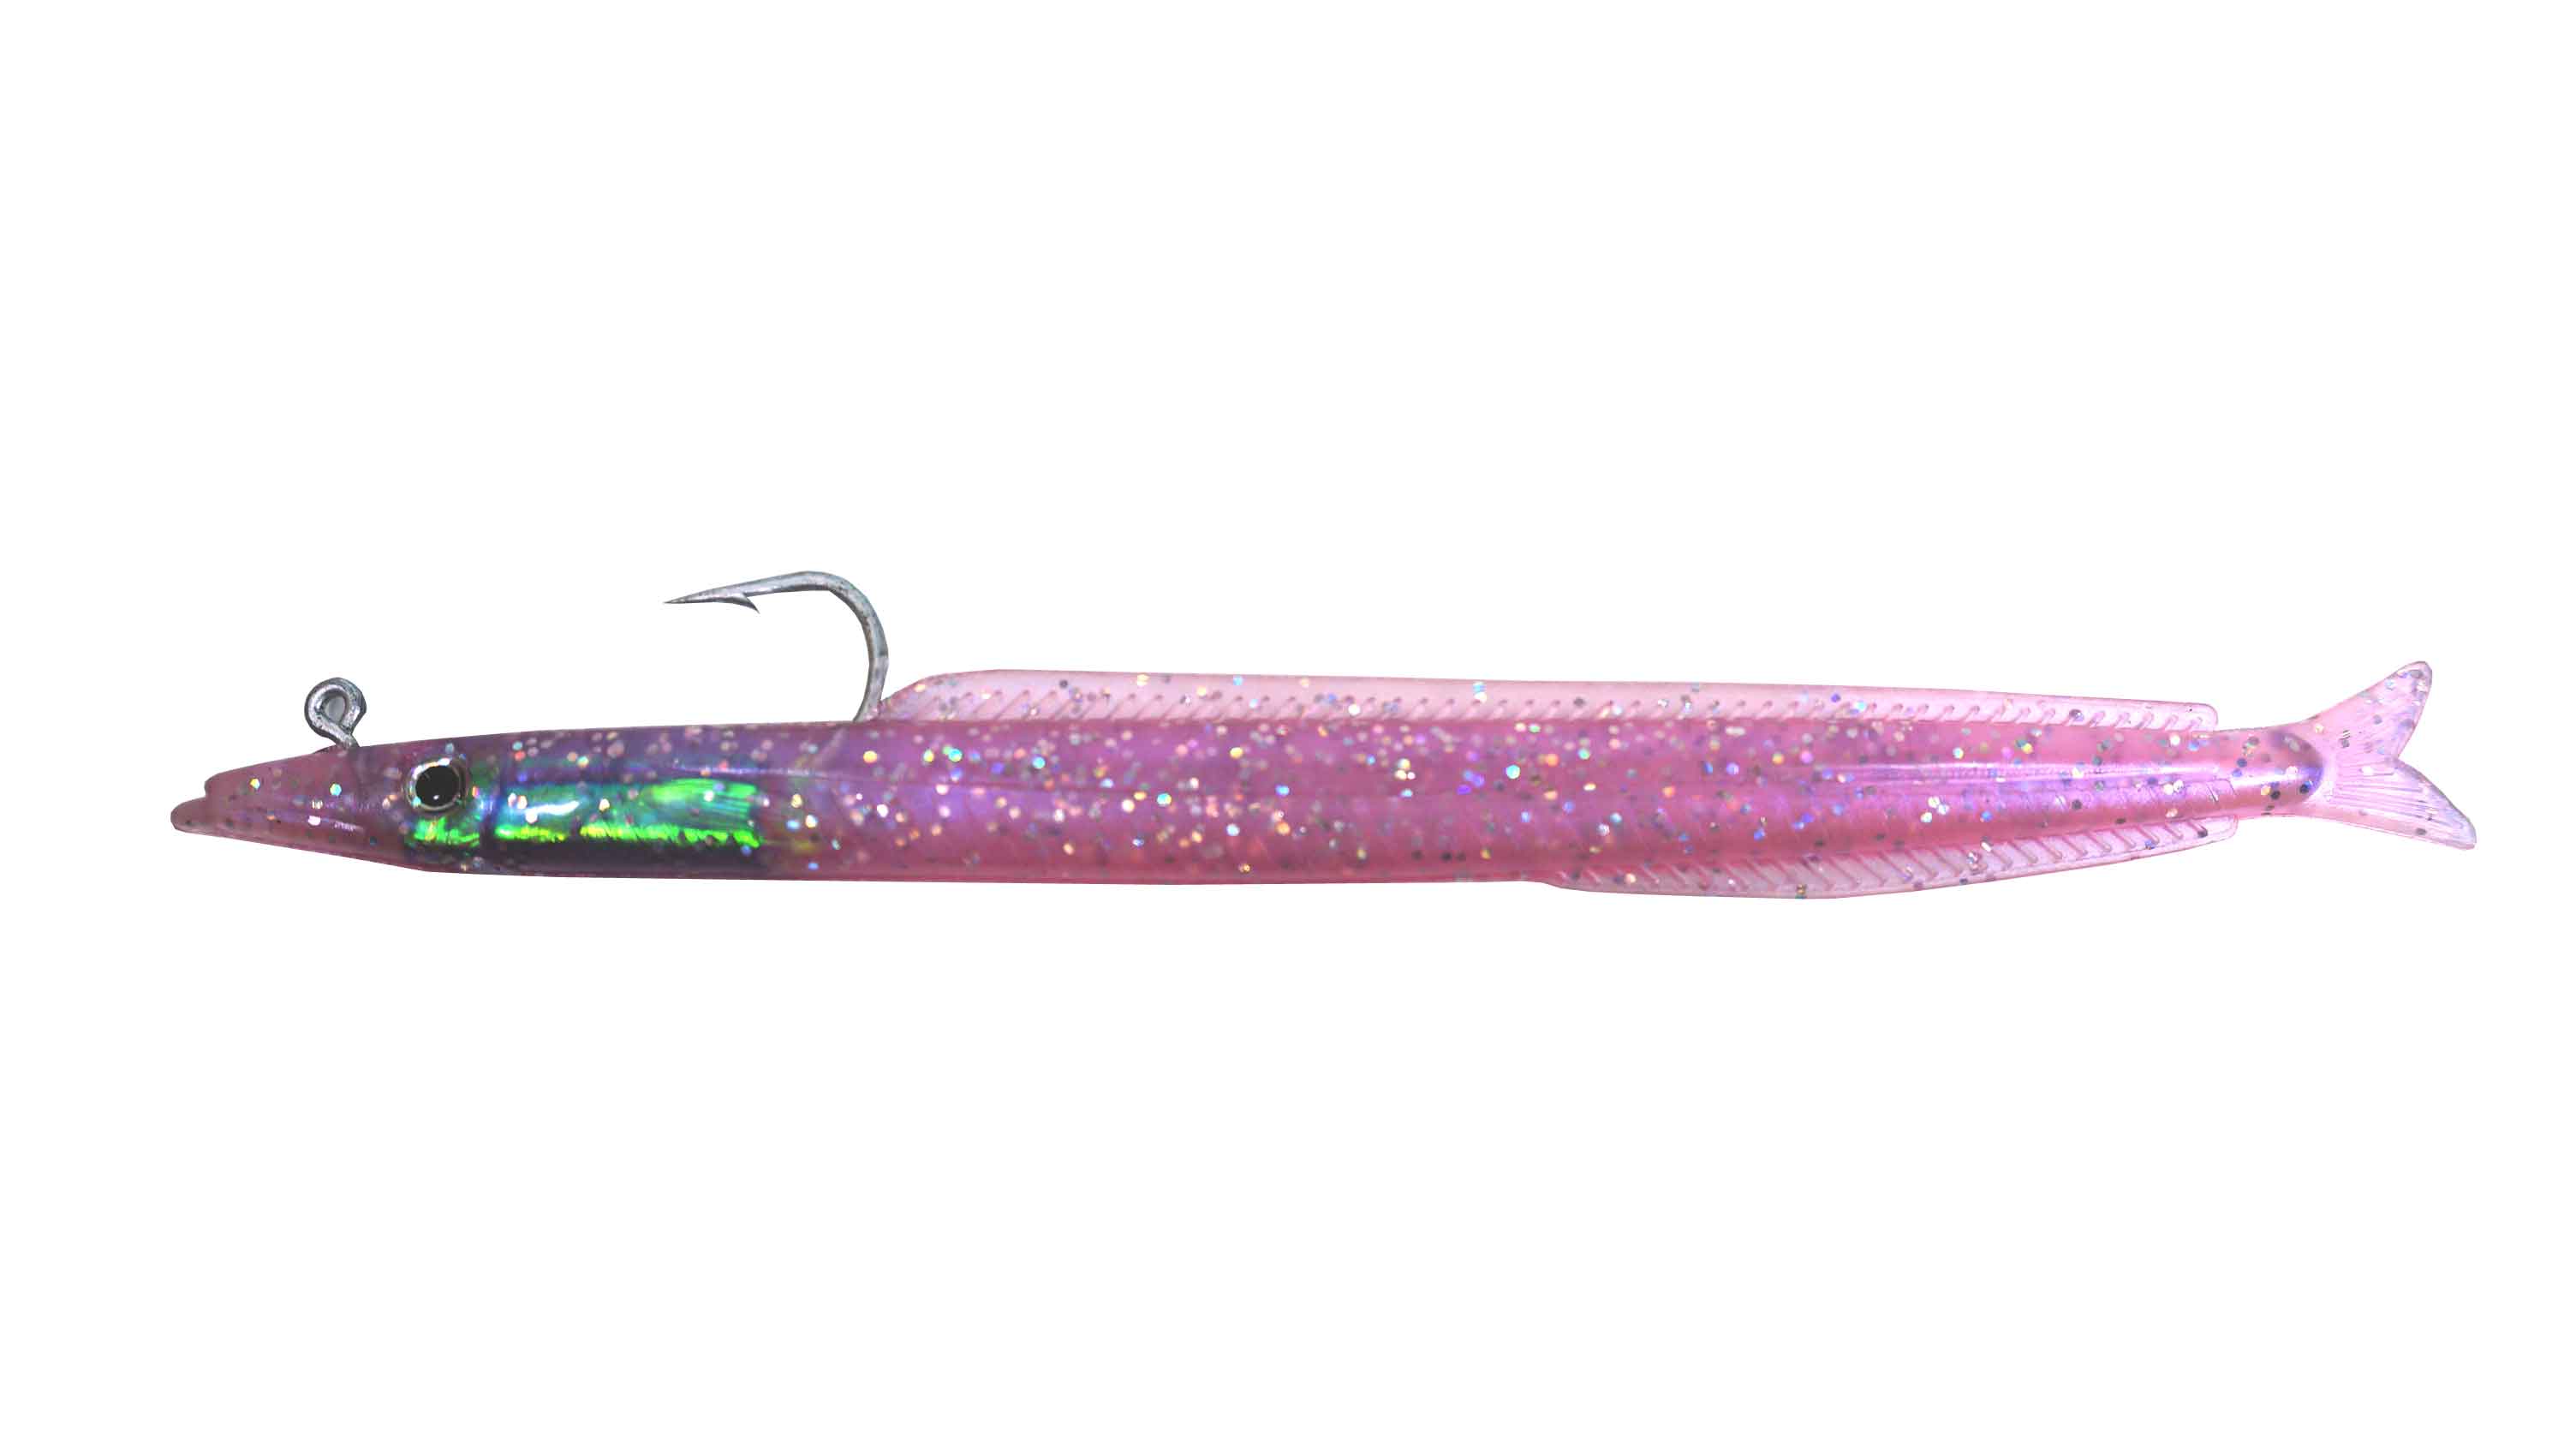 Almost Alive 5" Soft Sand Eel Lure Purple Flake Rigged